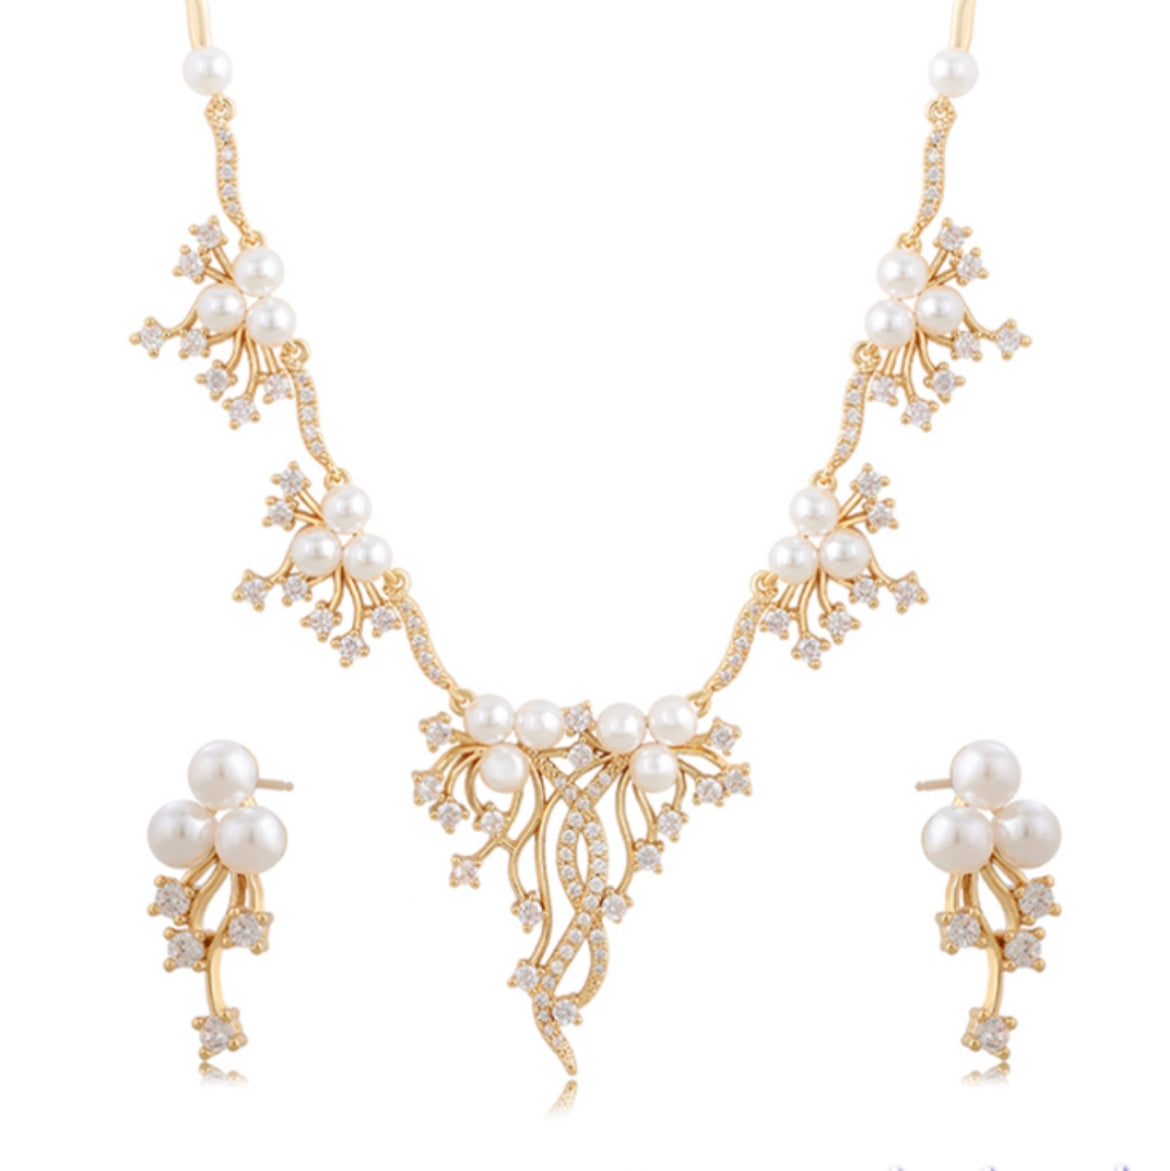 Timeless Trio: 3 Pearls Earrings and Necklace Set – Effortless Elegance"